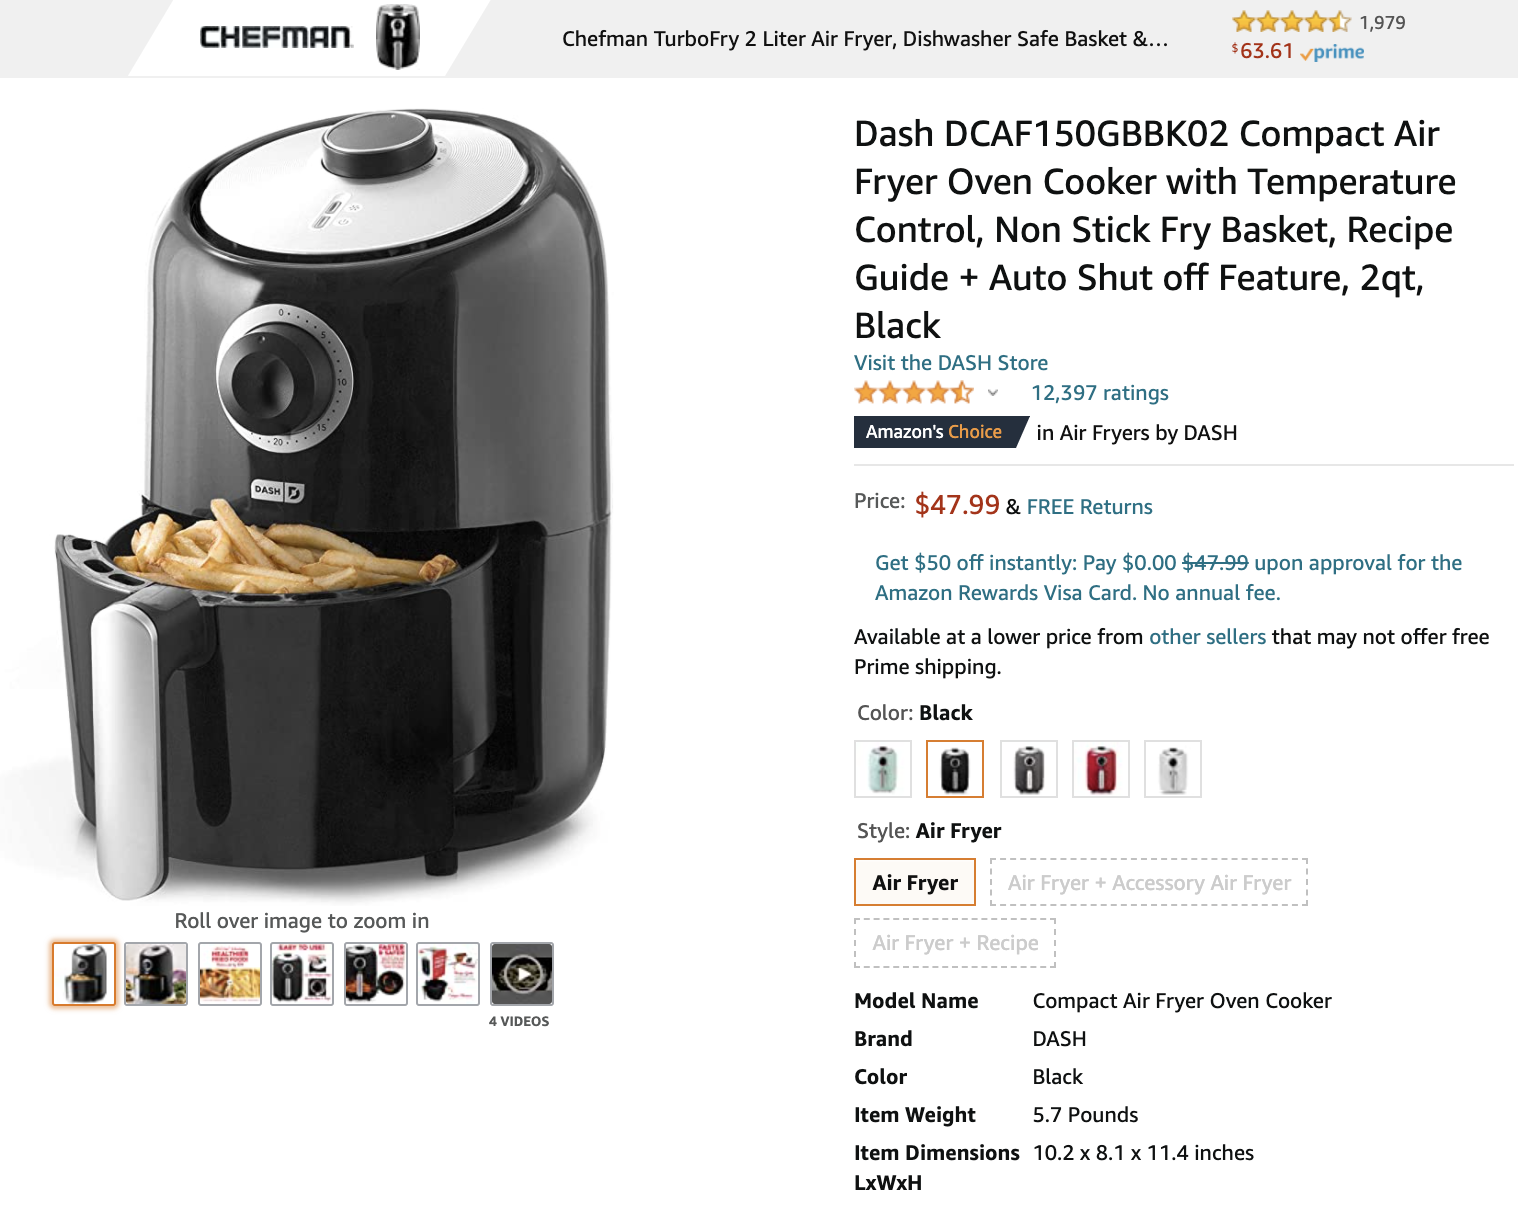 Amazon Manage Your Experiments: screenshot of a product listing for an air fryer